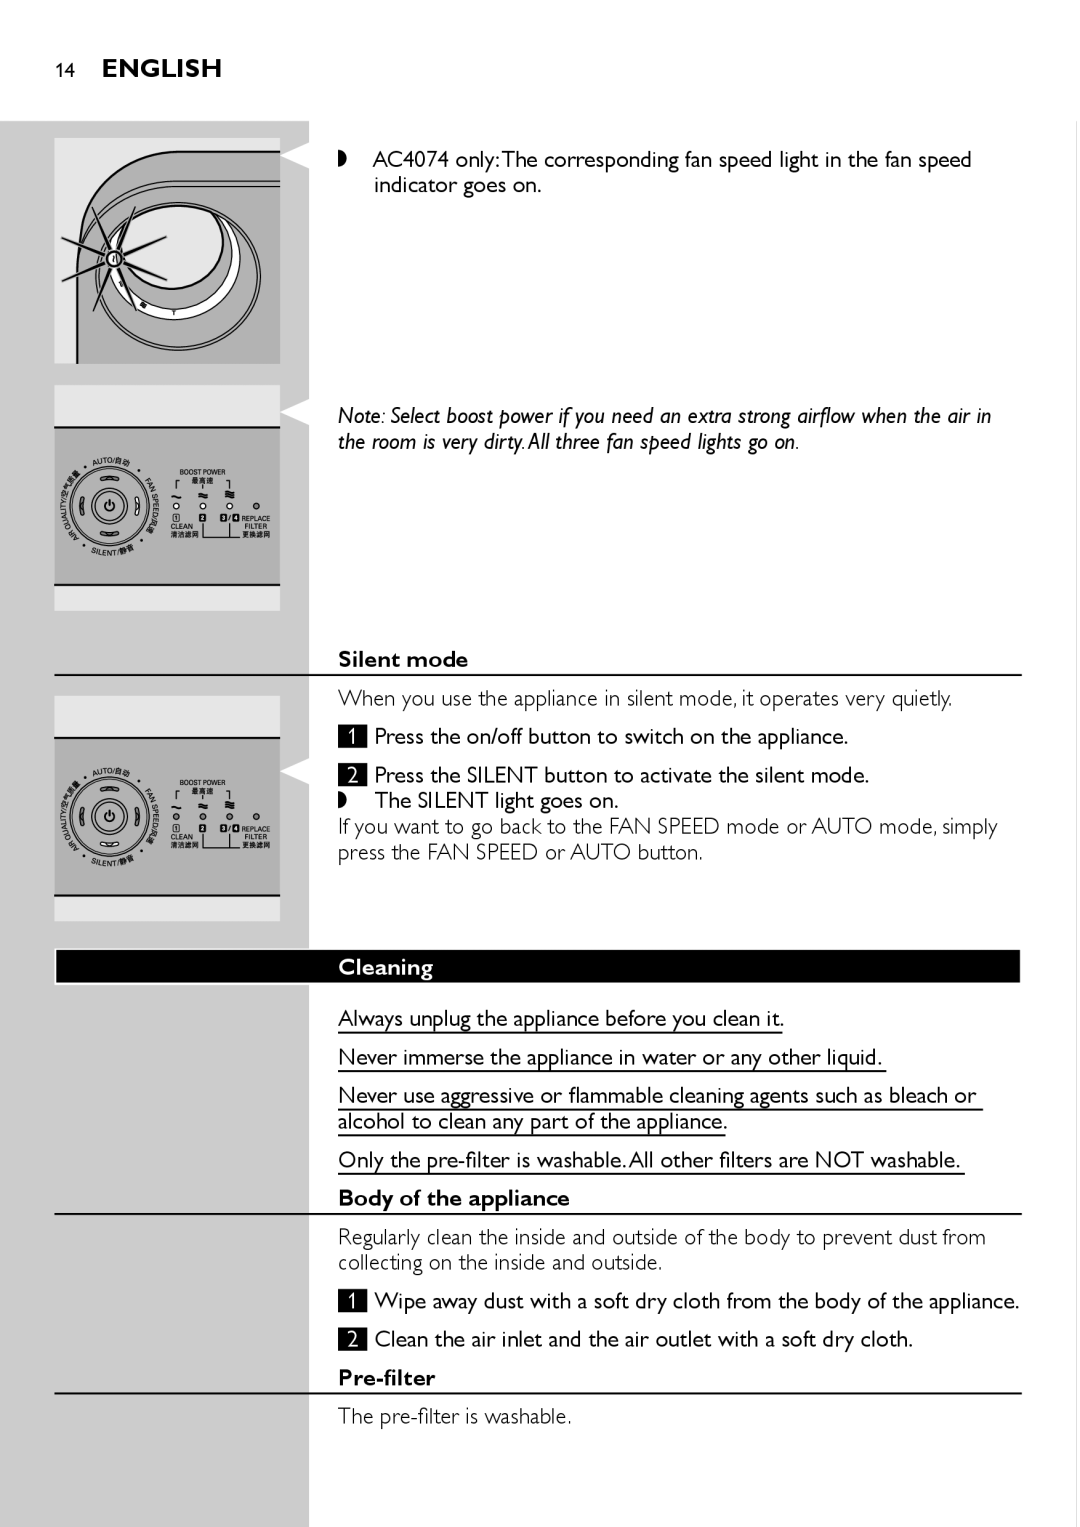 Philips AC4072 user manual 14English, Silent mode, Cleaning, Body of the appliance, Pre-filter 